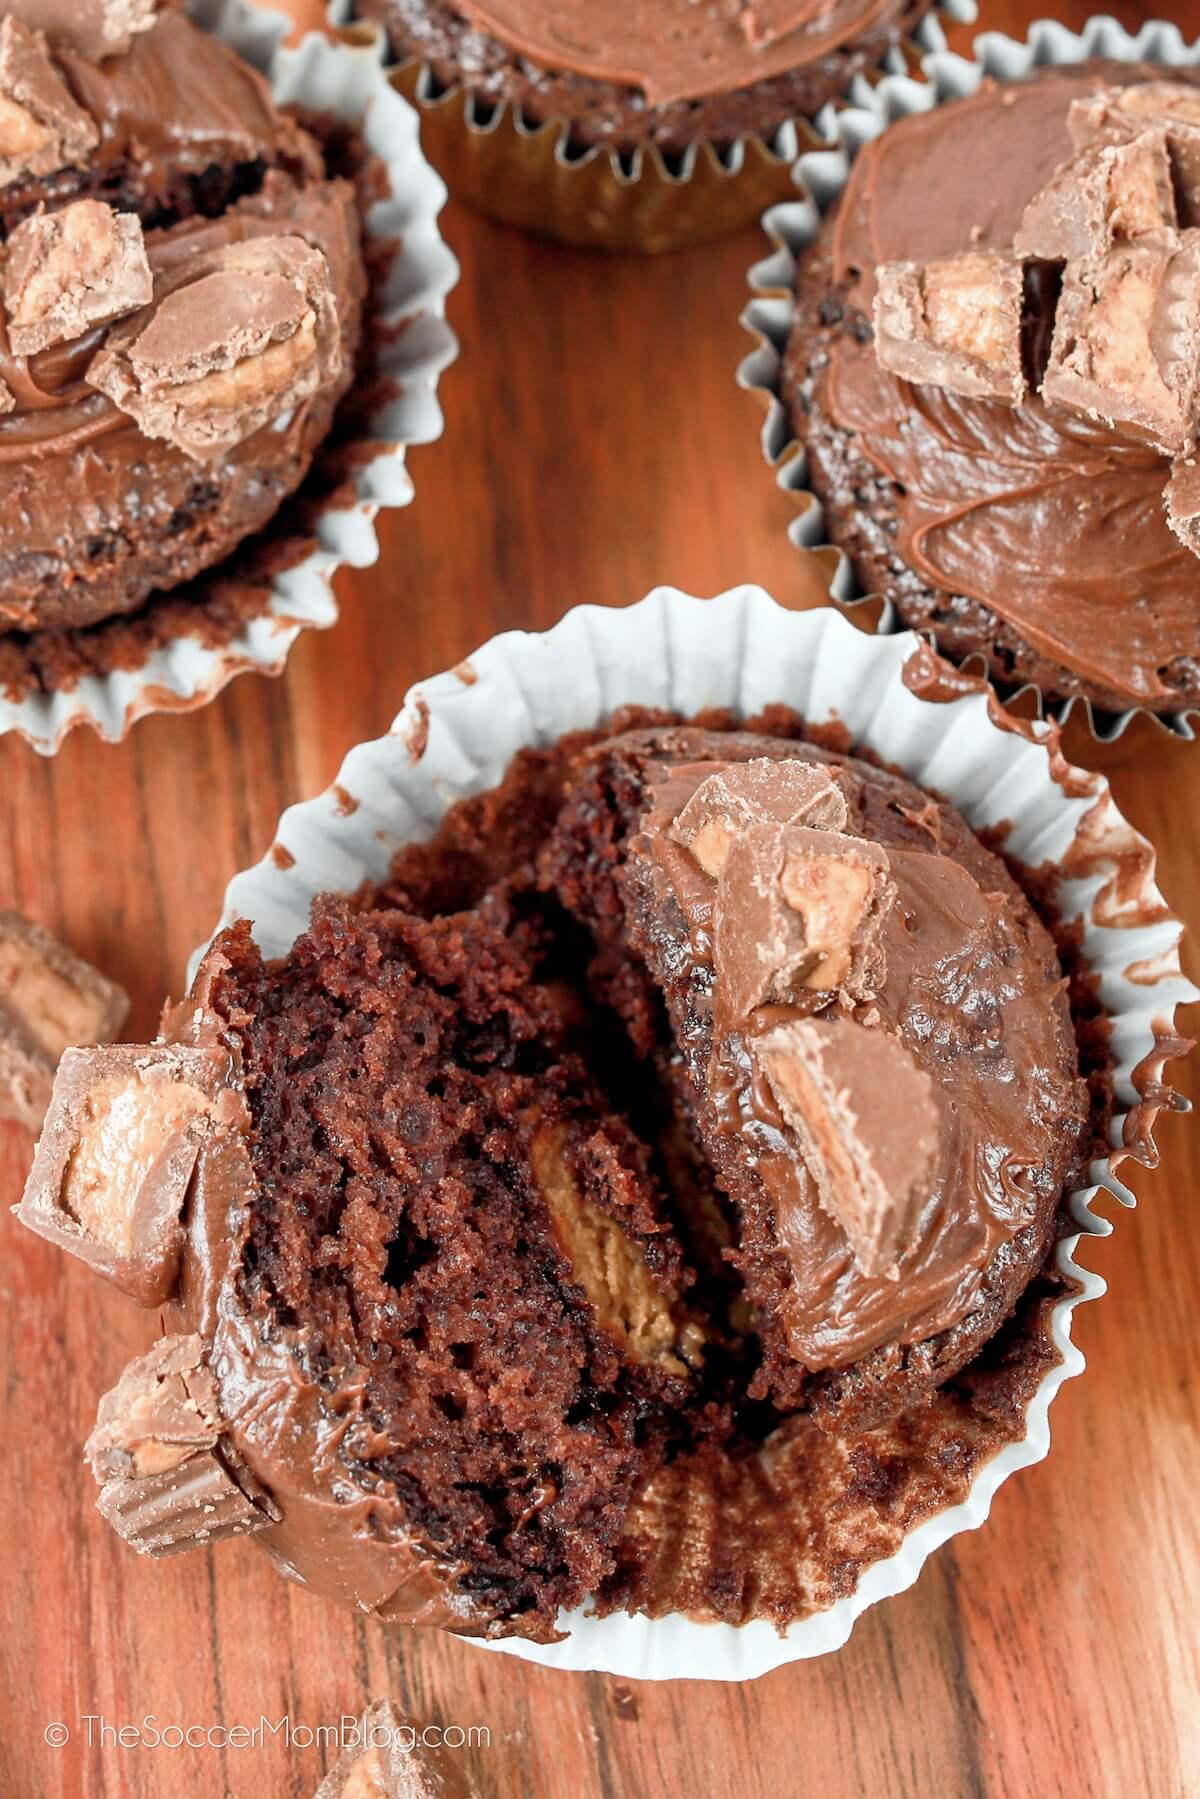 cupcakes with Reese's cups inside